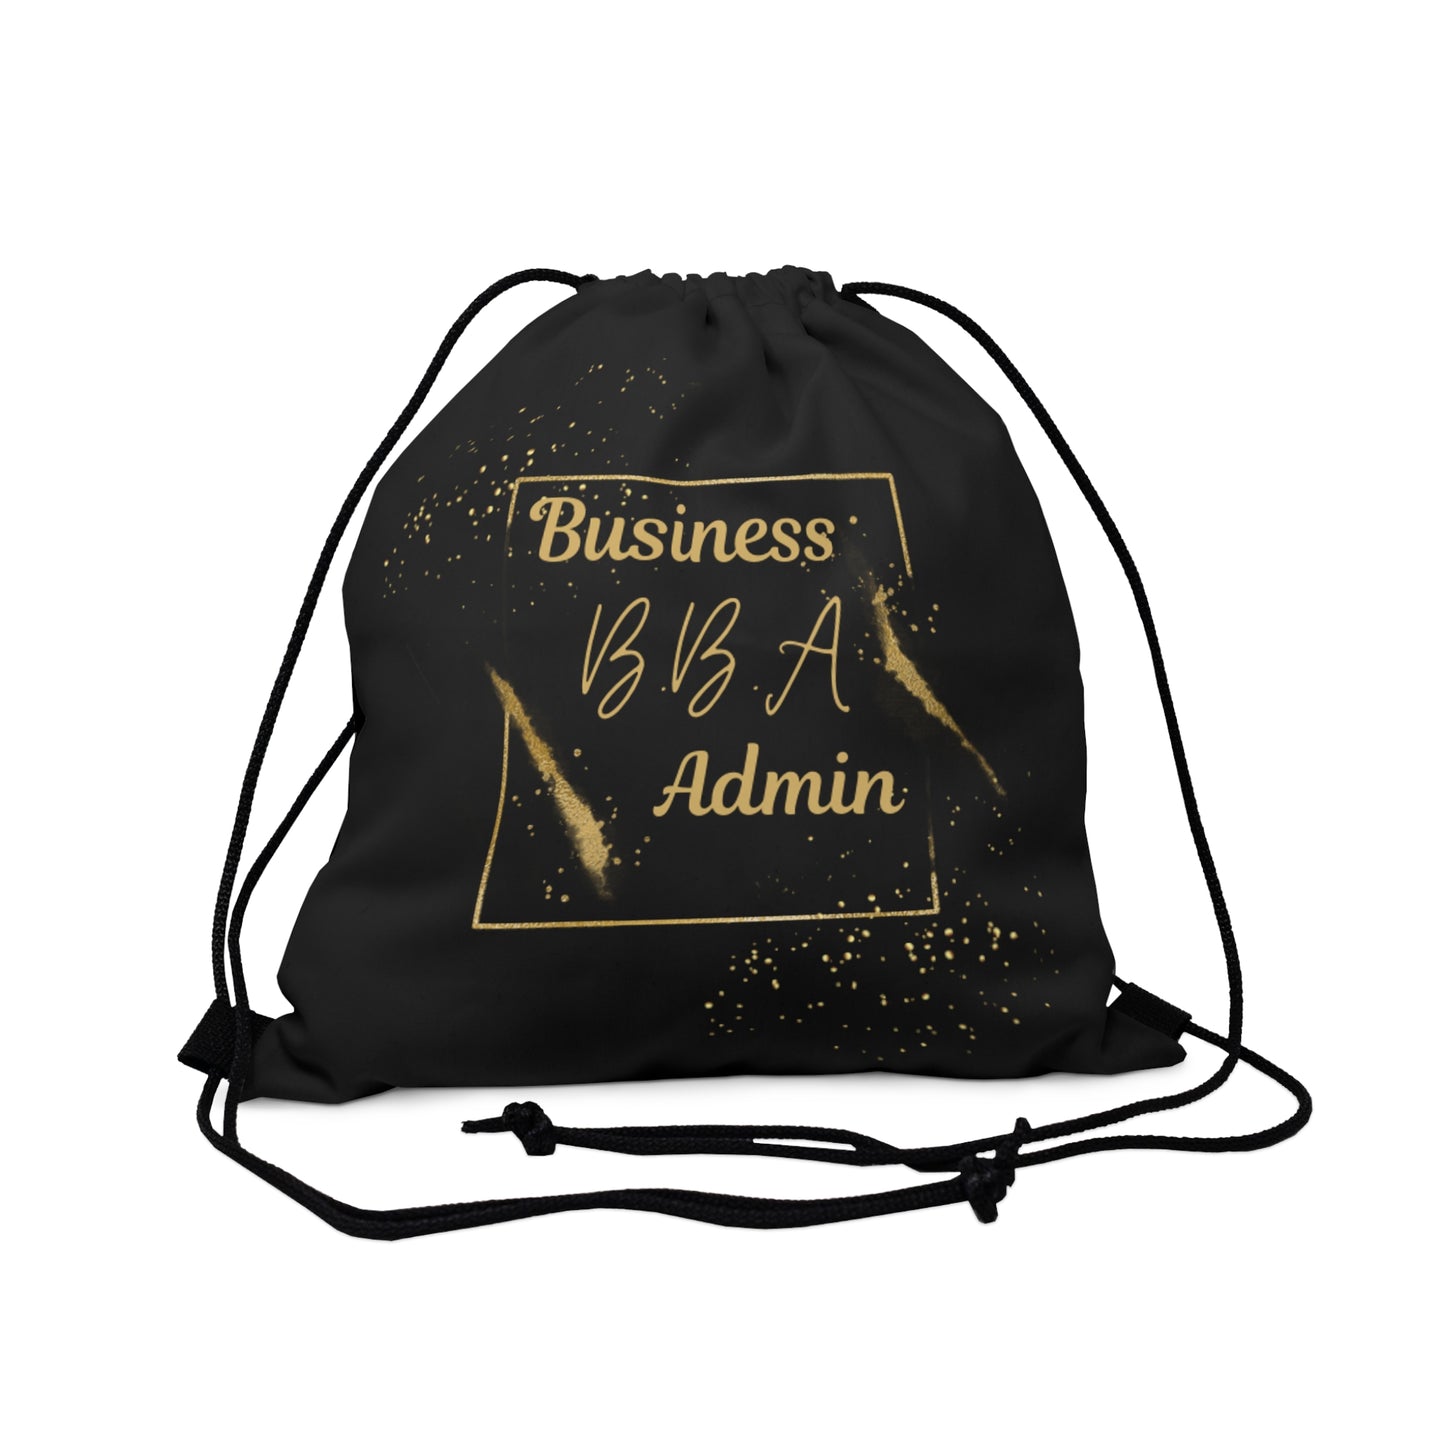 B.B.A- Drawstring Bag with Bachelor of Business Administration Credentials